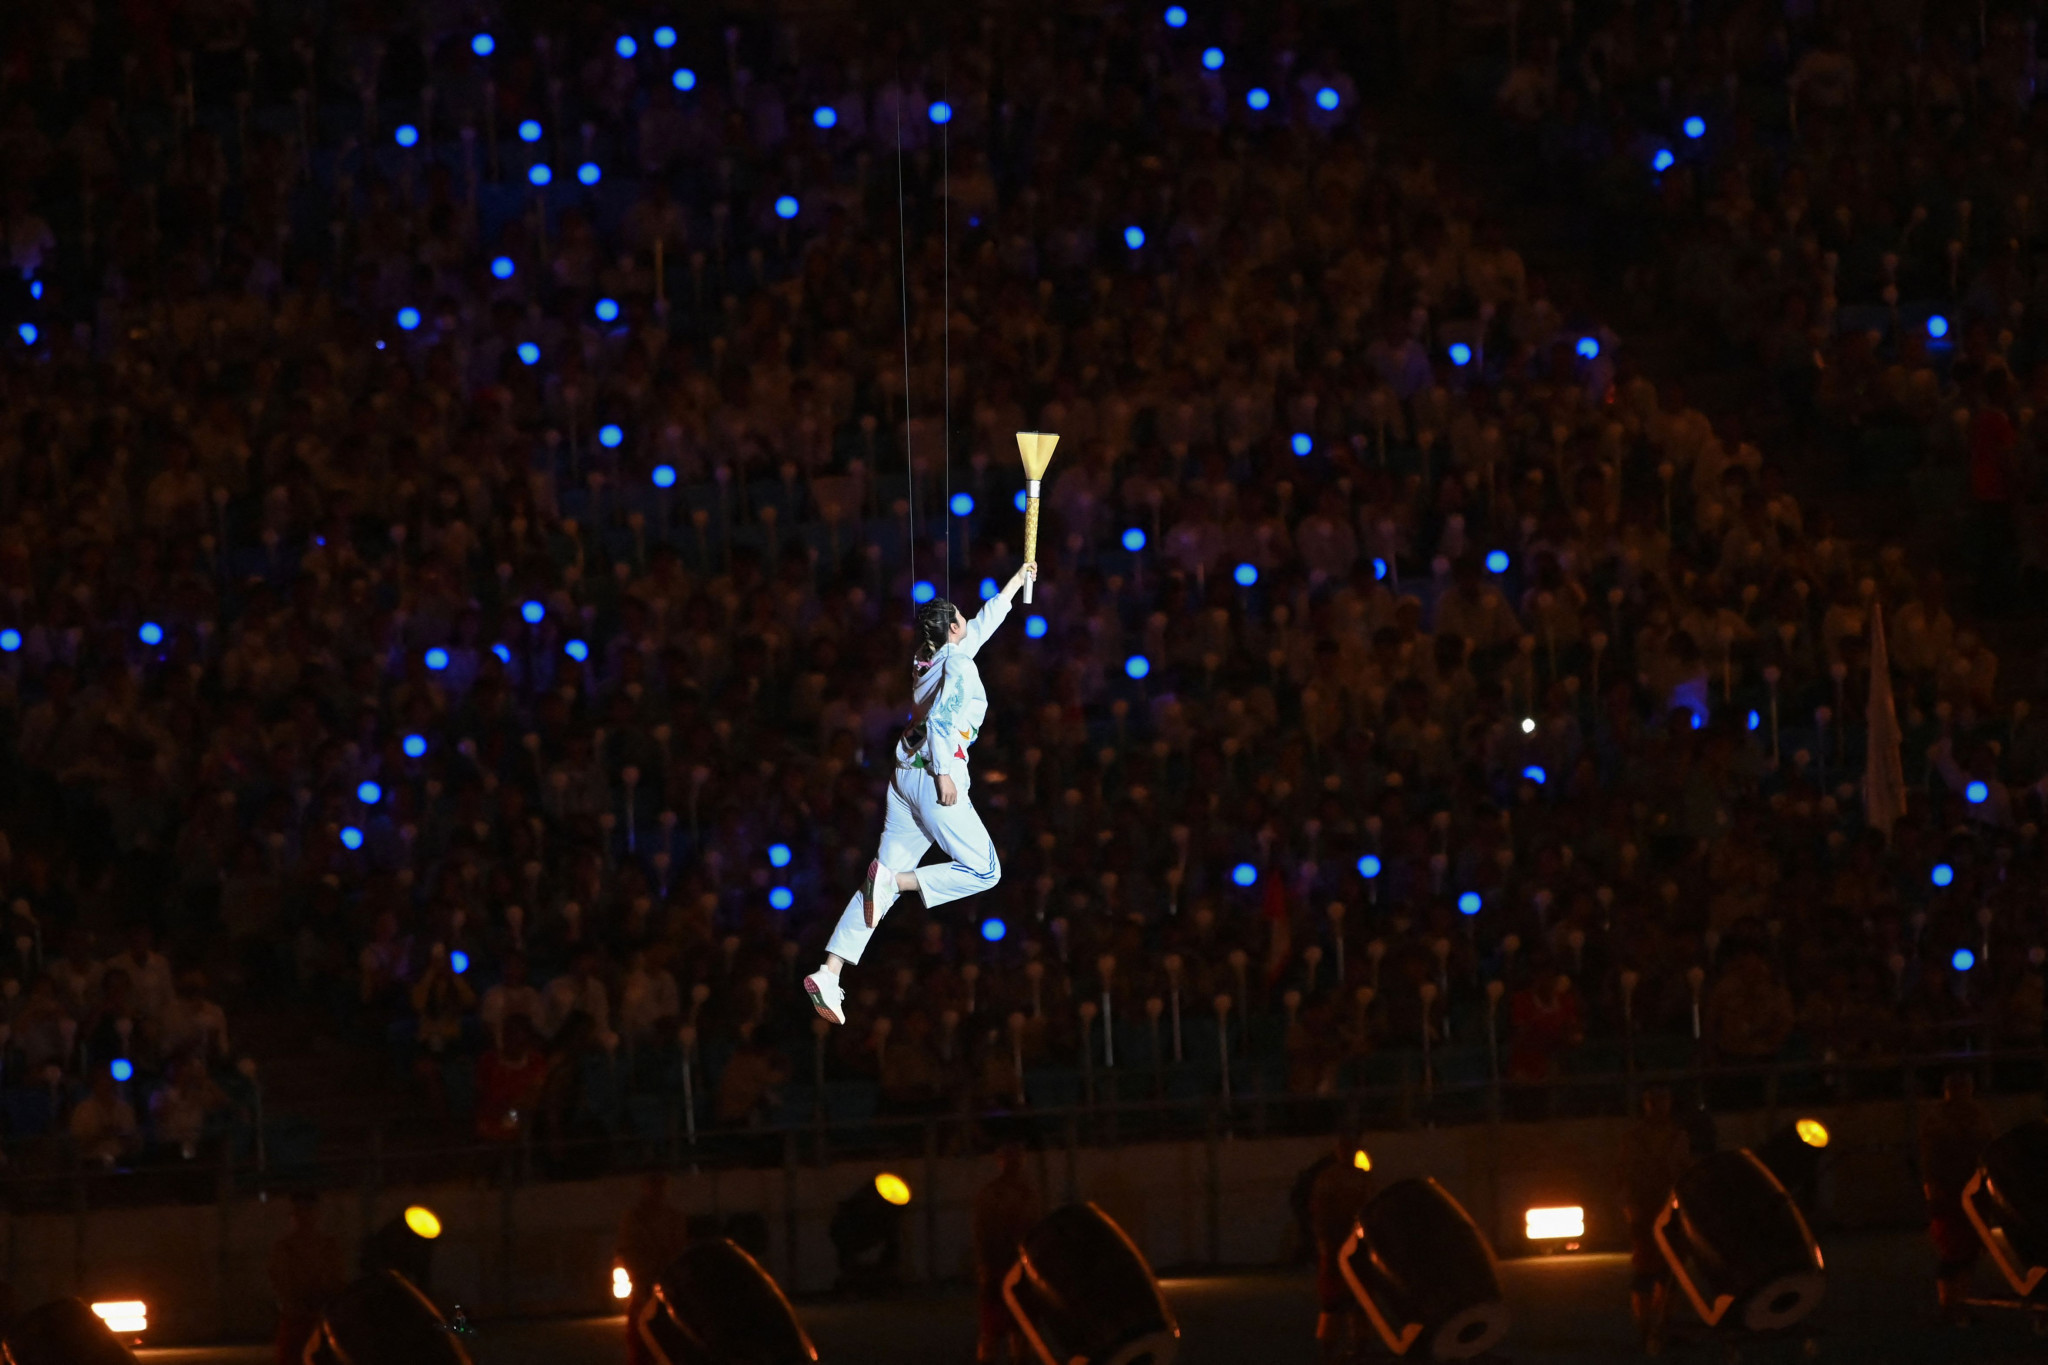 Cambodia's three-time Southeast Asian Games taekwondo gold medallist Sorn Seavmey flew through the air on her way to lighting the Cauldron at the Opening Ceremony ©Getty Images